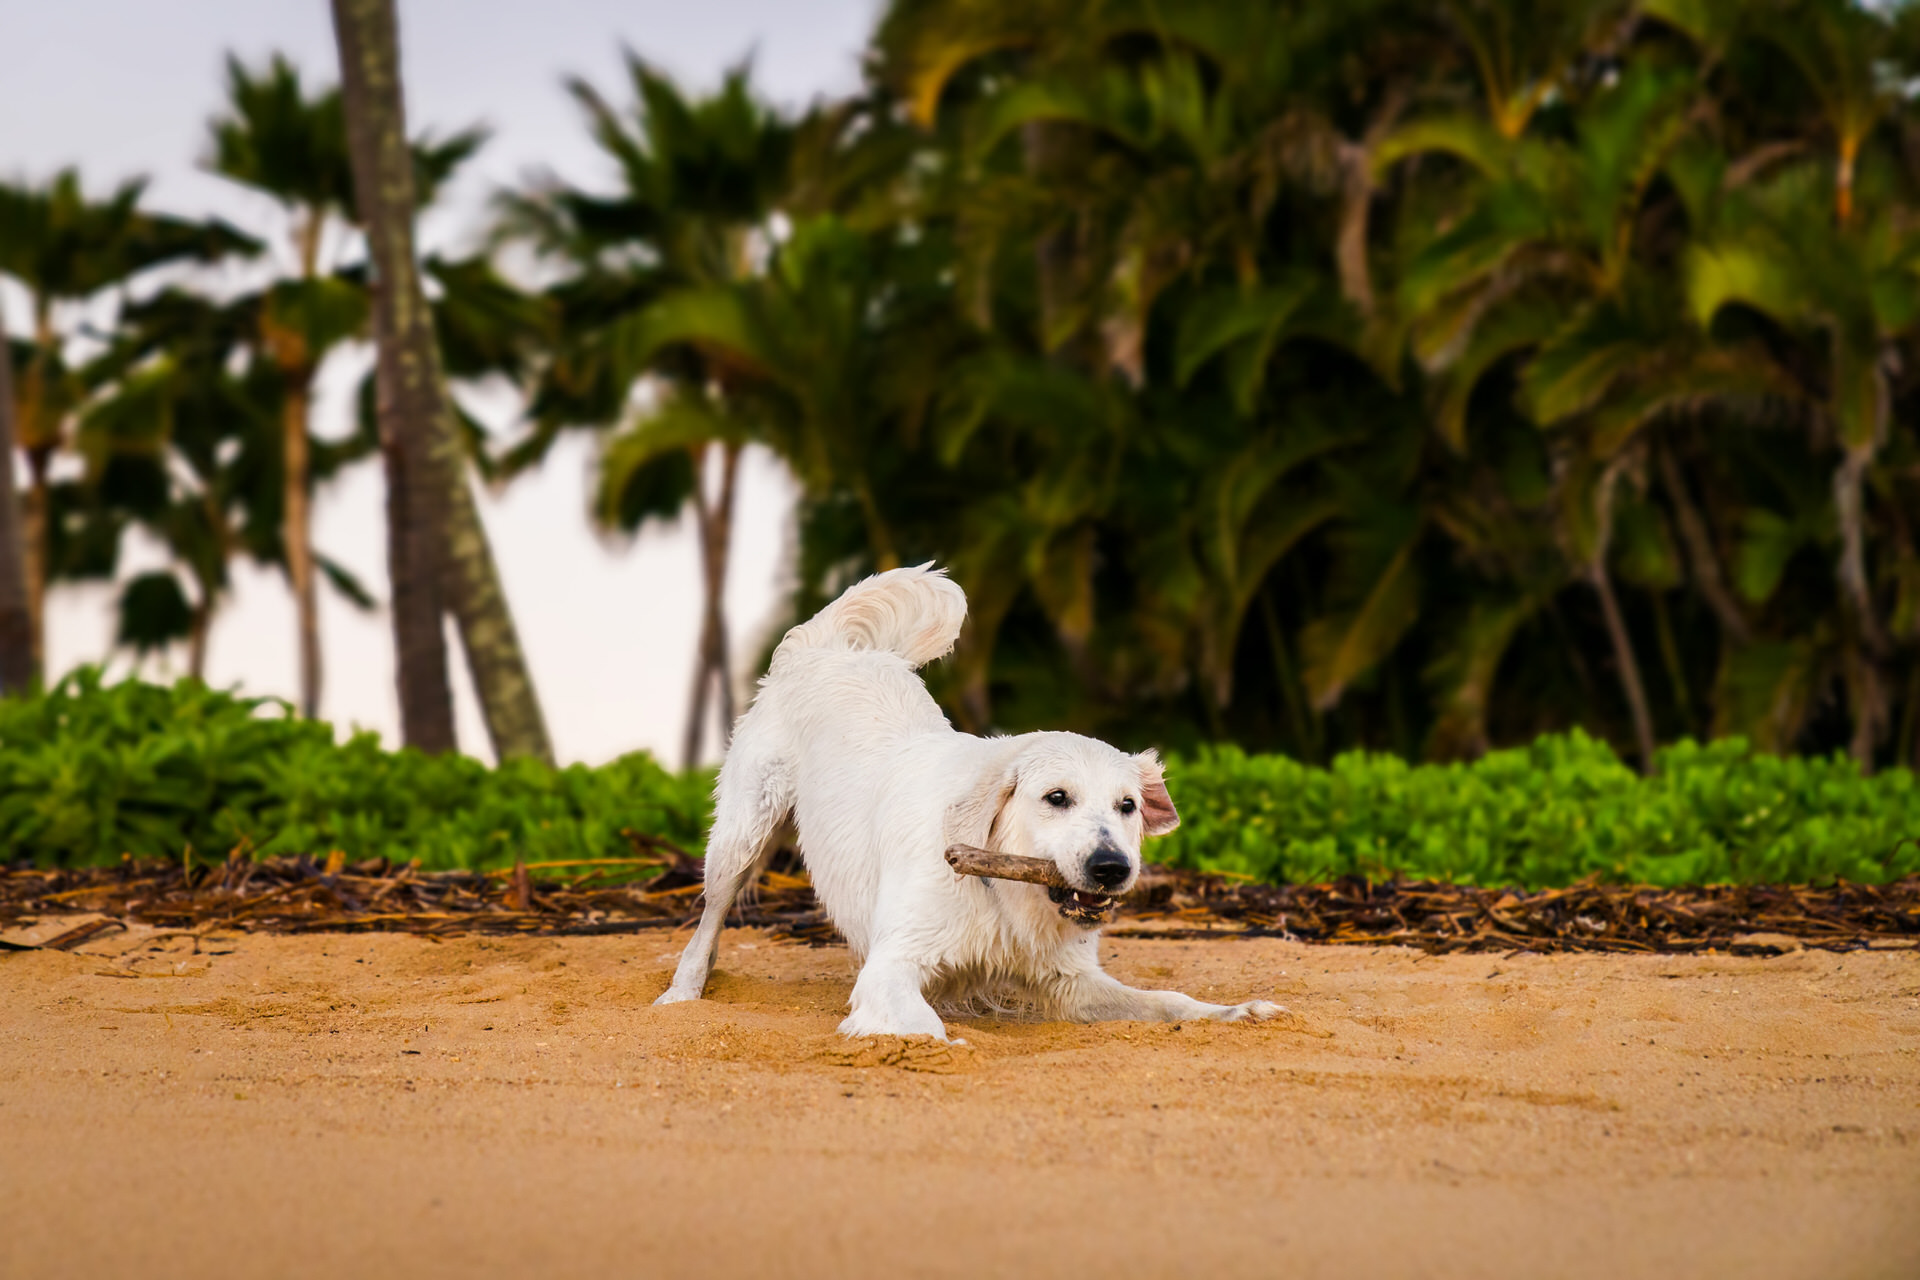 Dog playing with stick on beach.